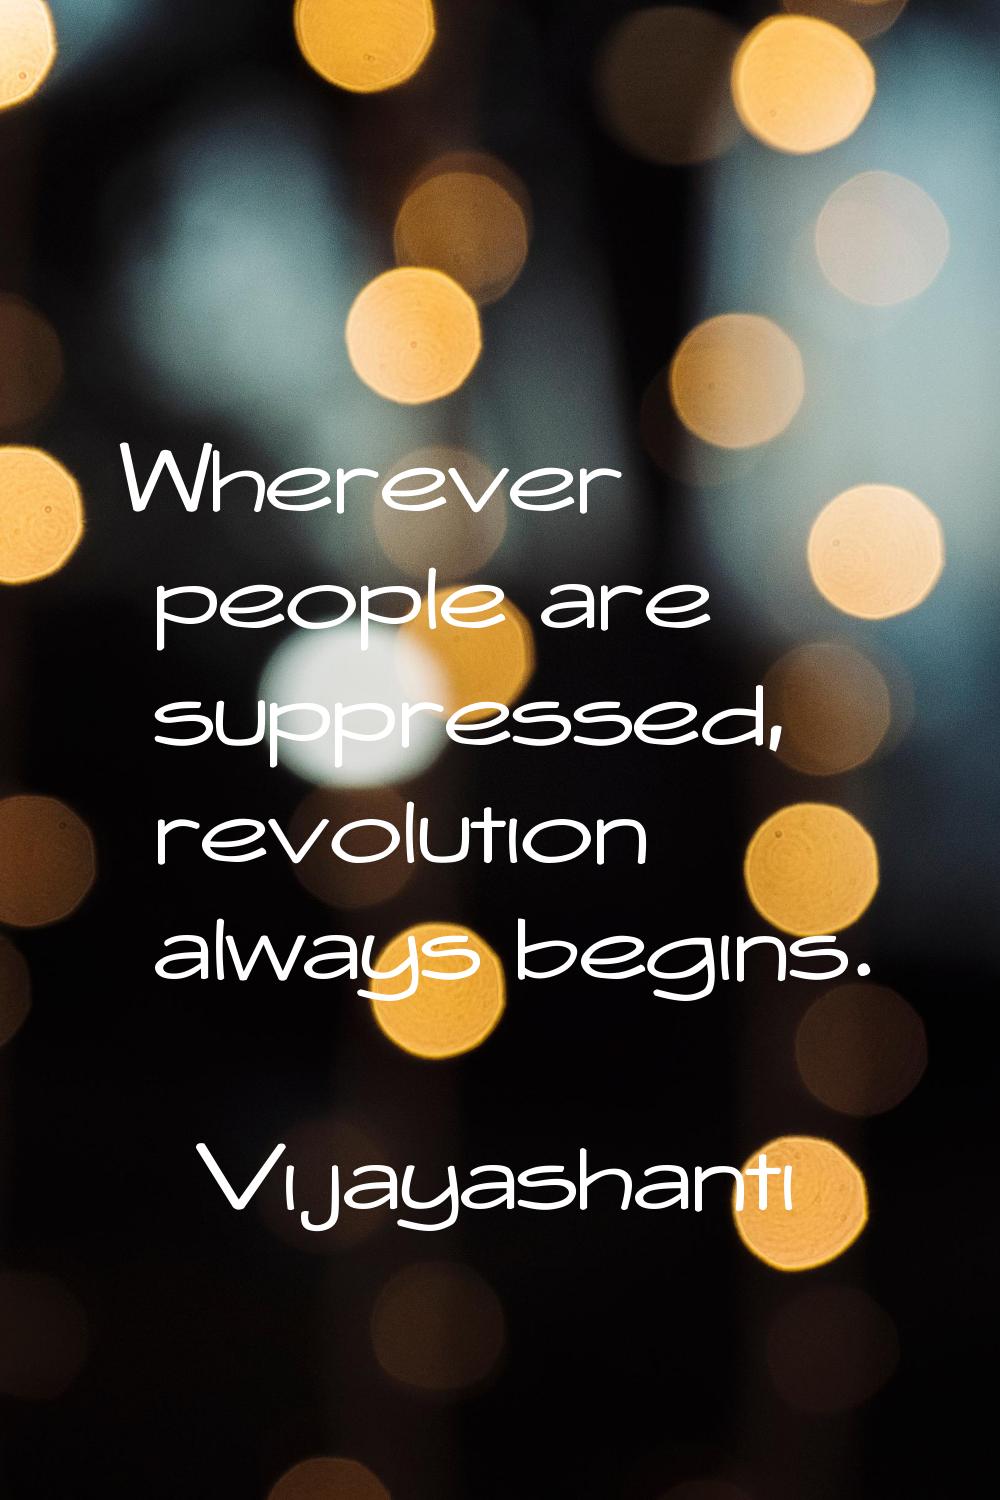 Wherever people are suppressed, revolution always begins.